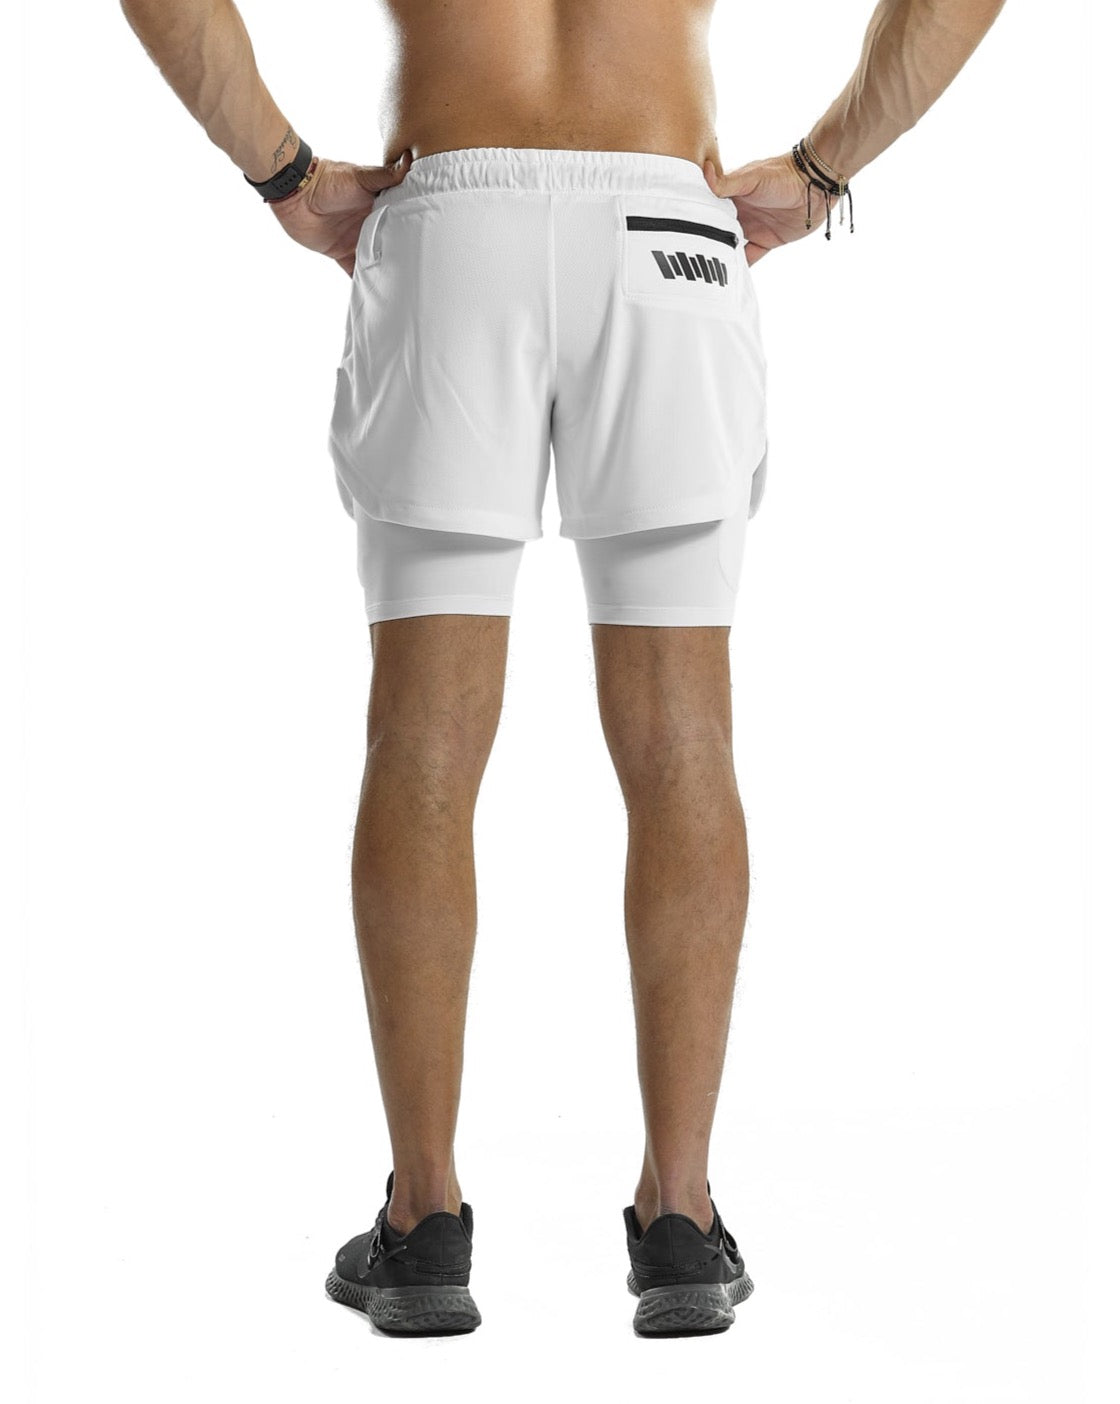 2 in 1 Functional Training Shorts [White] - Shorts - Gym Apparel Egypt